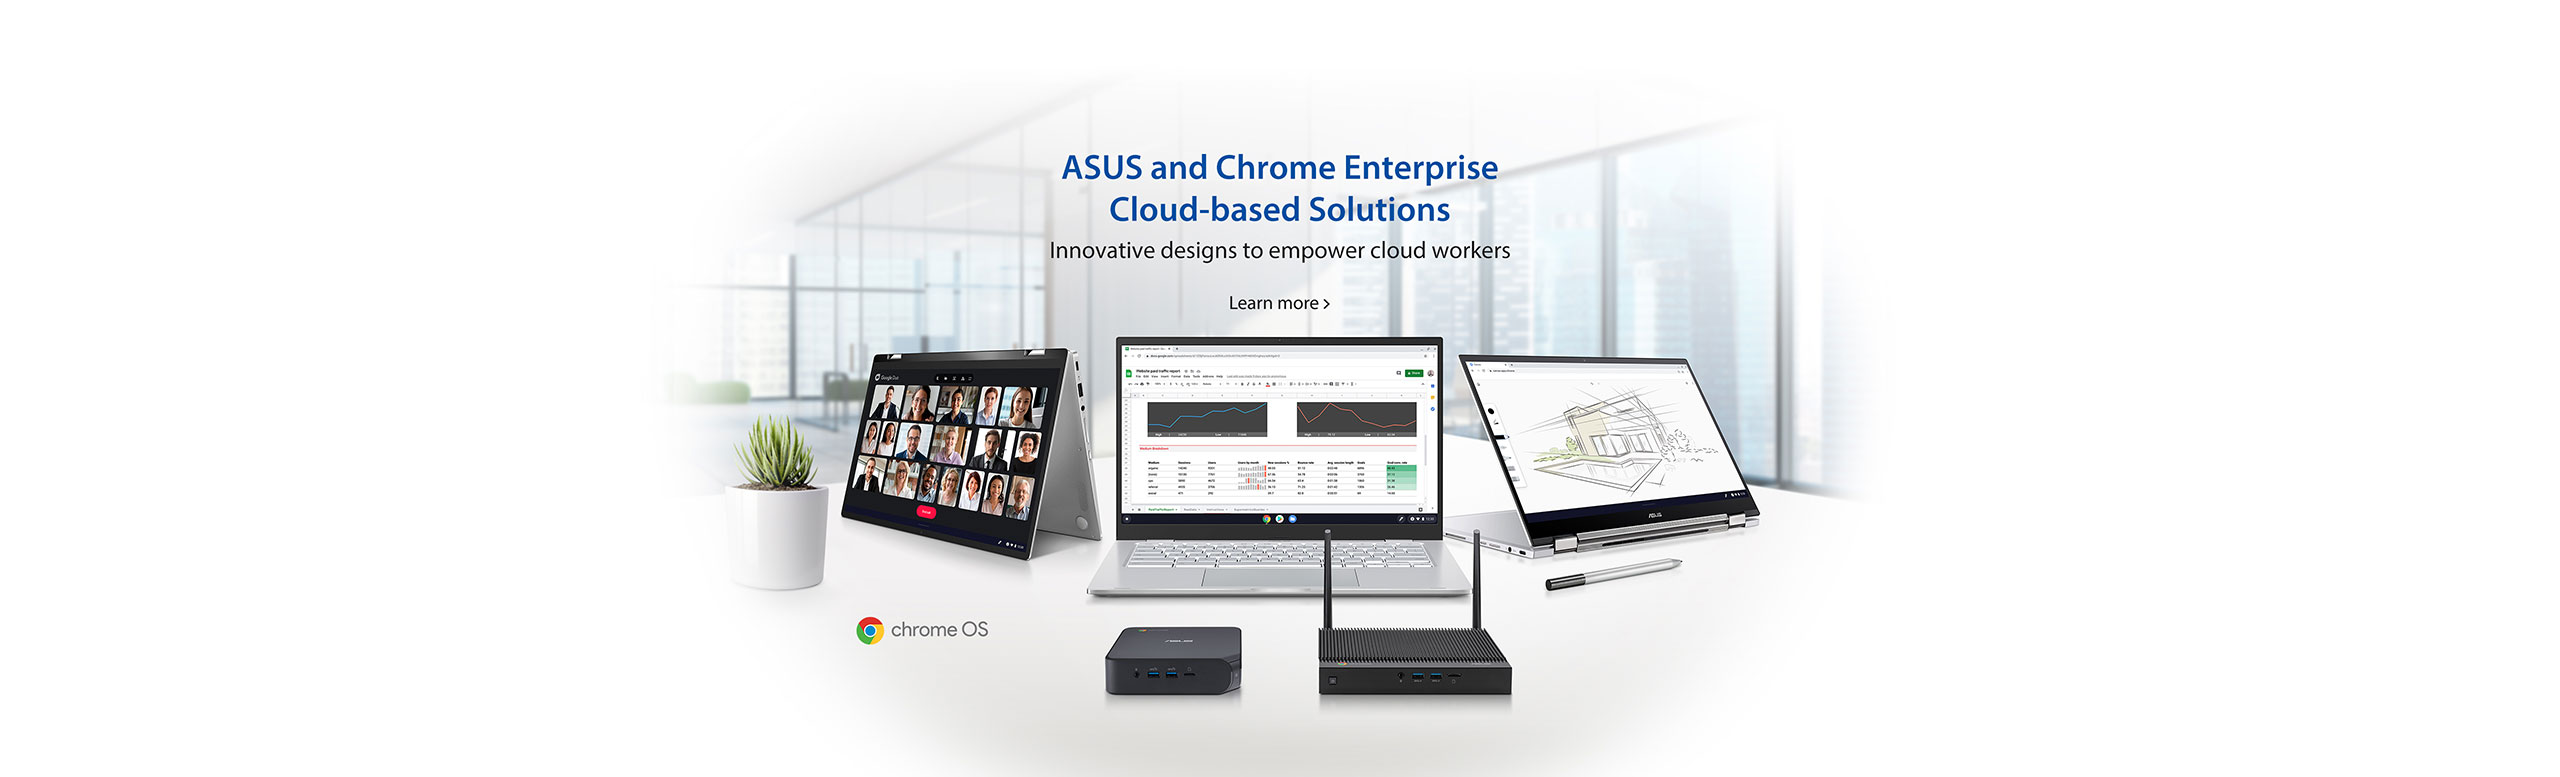 ASUS and Chrome Enterprise Cloud-Based Solutions